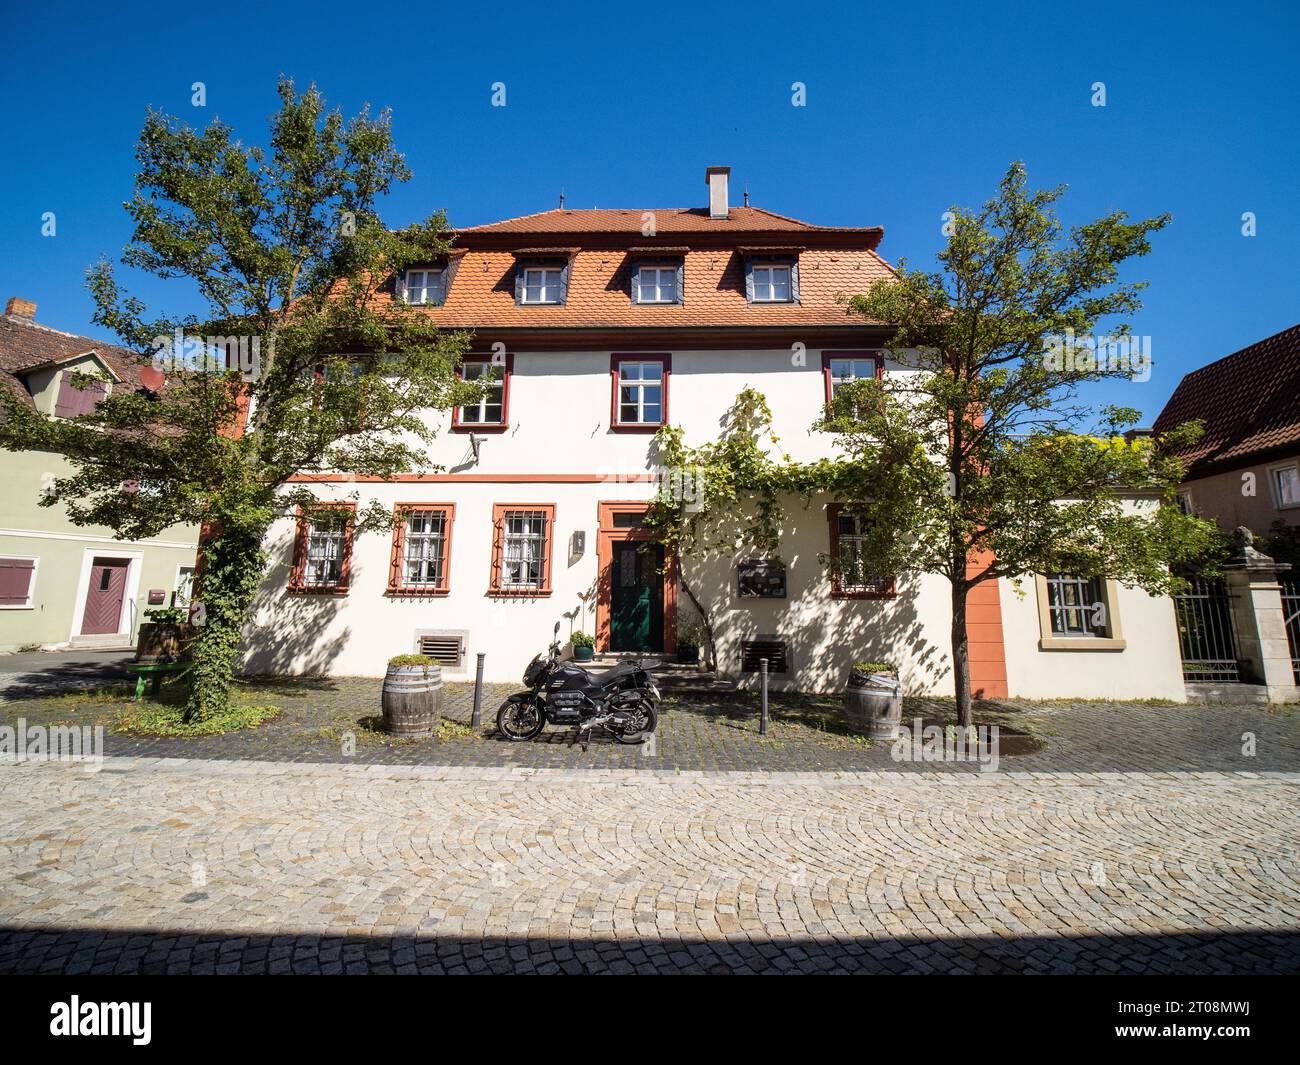 Motorbike in front of a house, Iphofen, district of Kitzingen, Lower Franconia, Bavaria, Germany Stock Photo